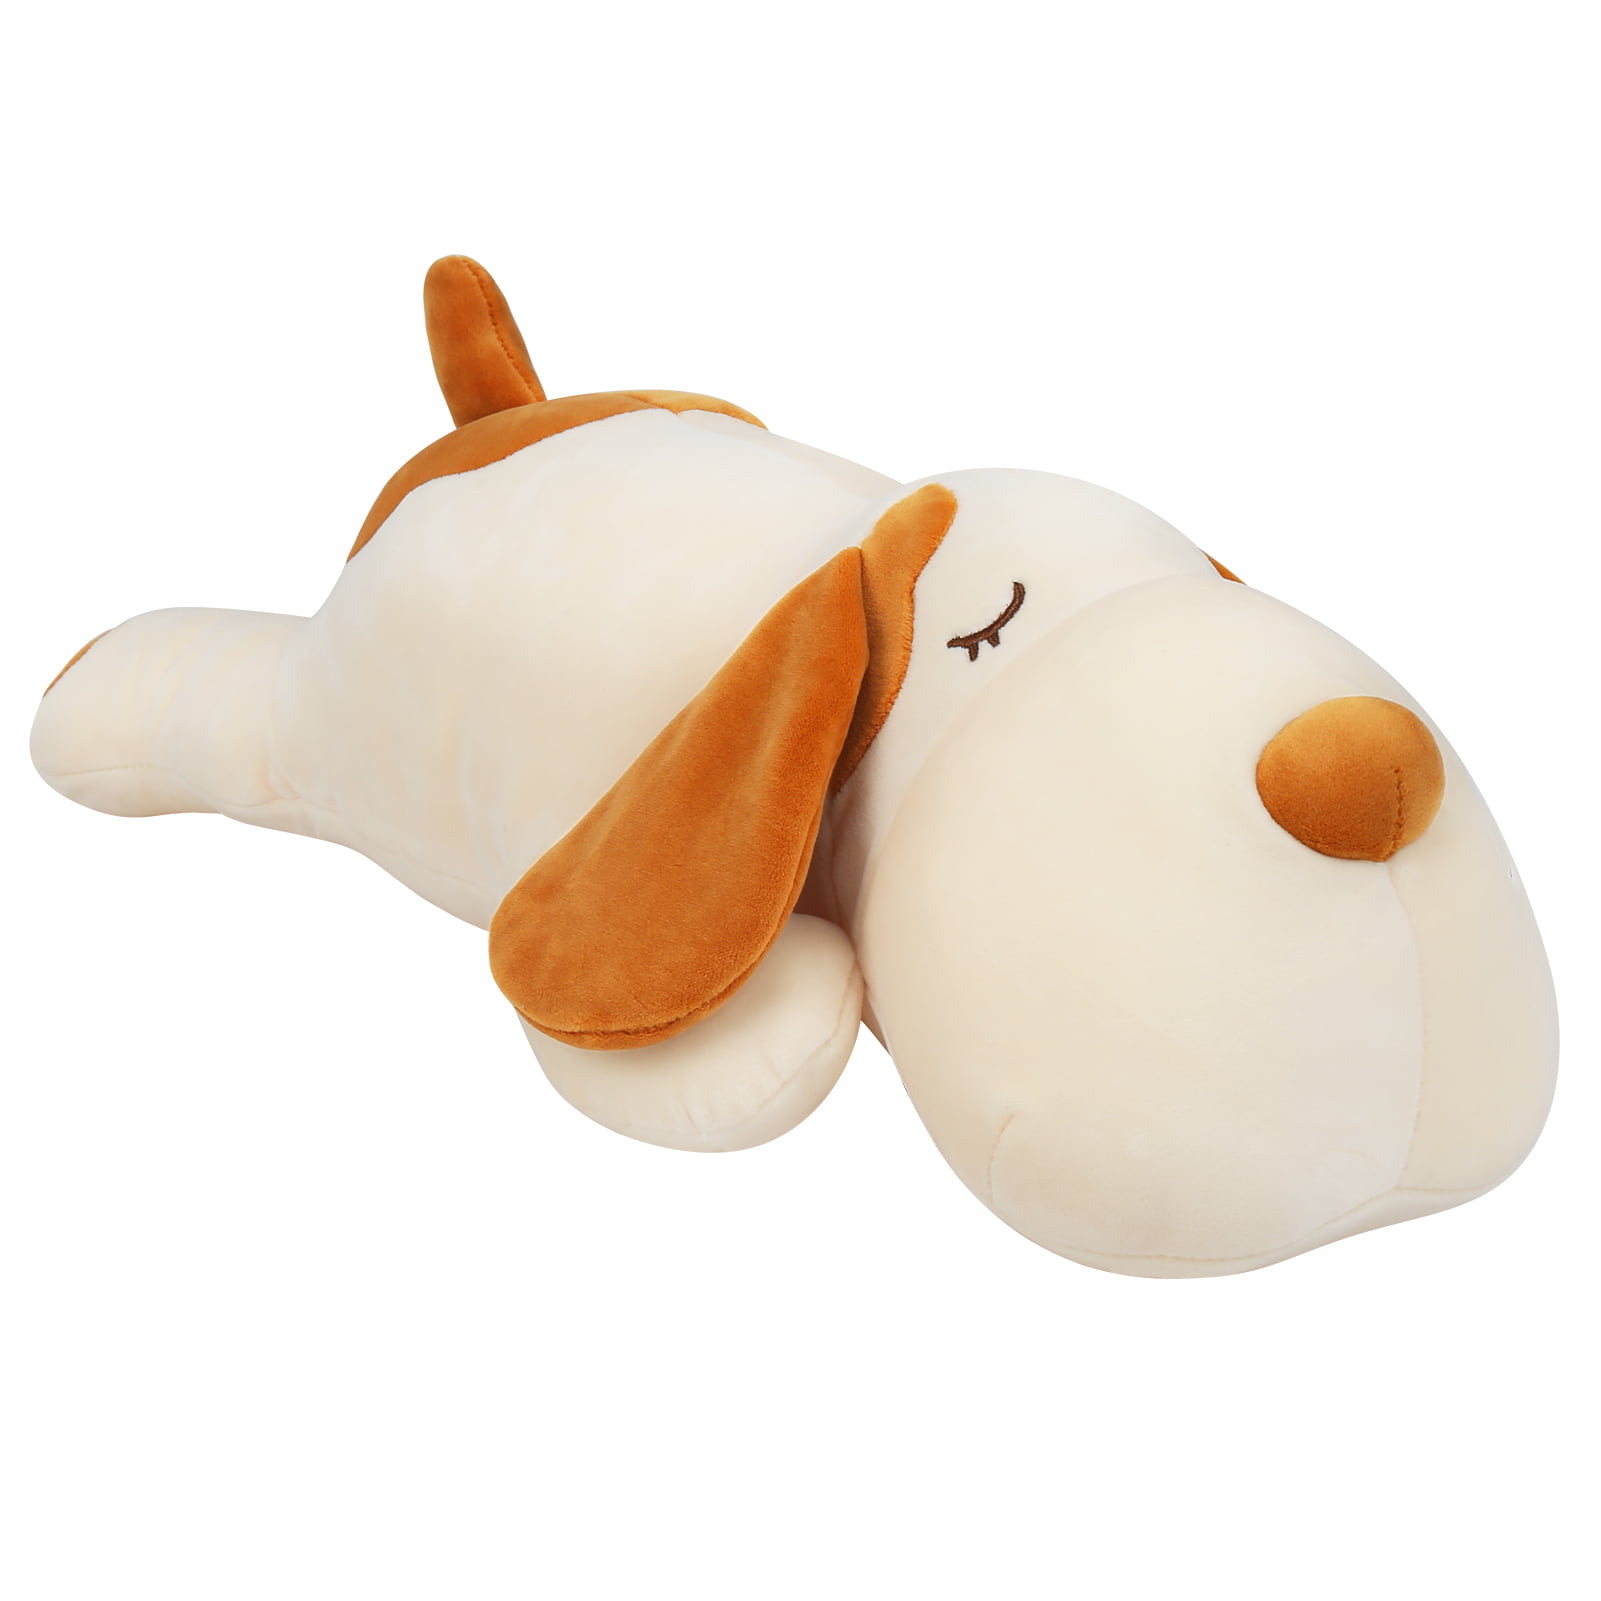 Details about   Large New Cute Animal Dog Plush Toy Sleep Pillow Child Birthday Gift Child Toy 